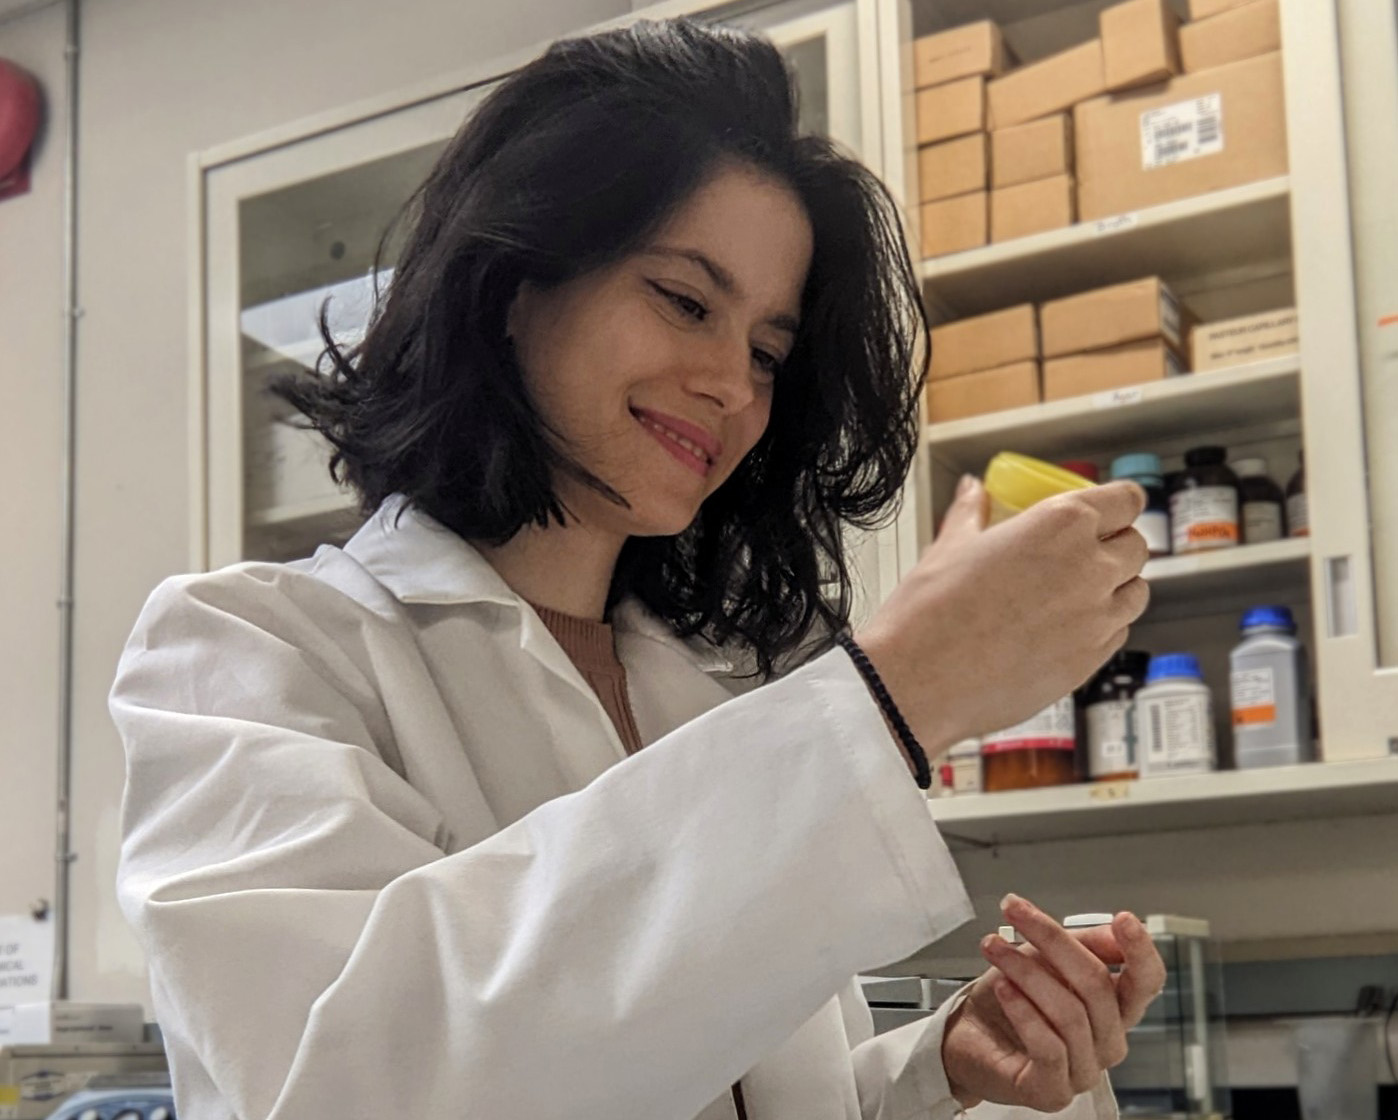 Female medical student wearing a white coat in a lab looking at a specimen in a container.